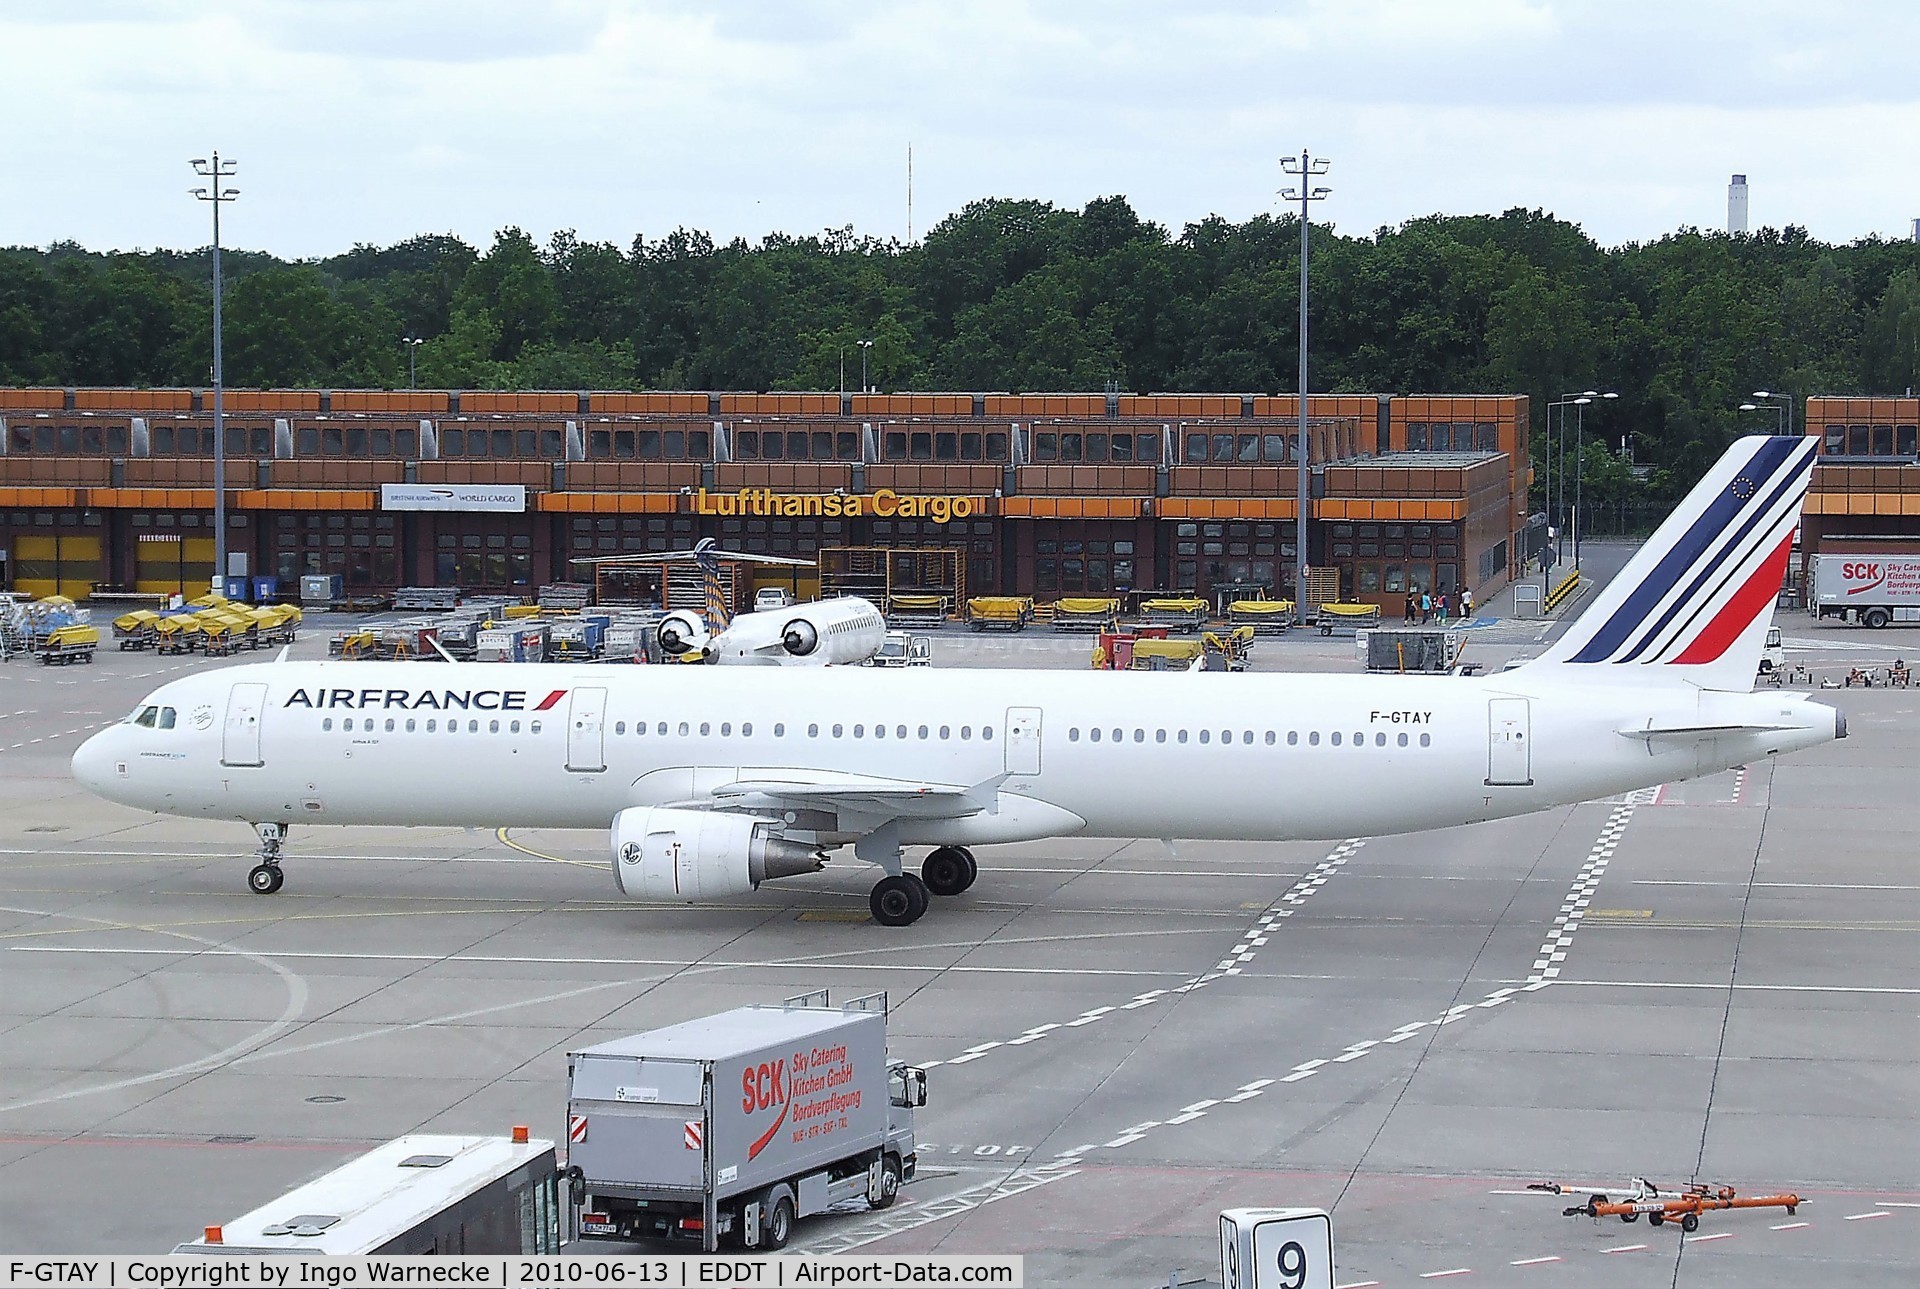 F-GTAY, 2010 Airbus A321-212 C/N 4251, Airbus A321-212 of Air France at Berlin/Tegel airport